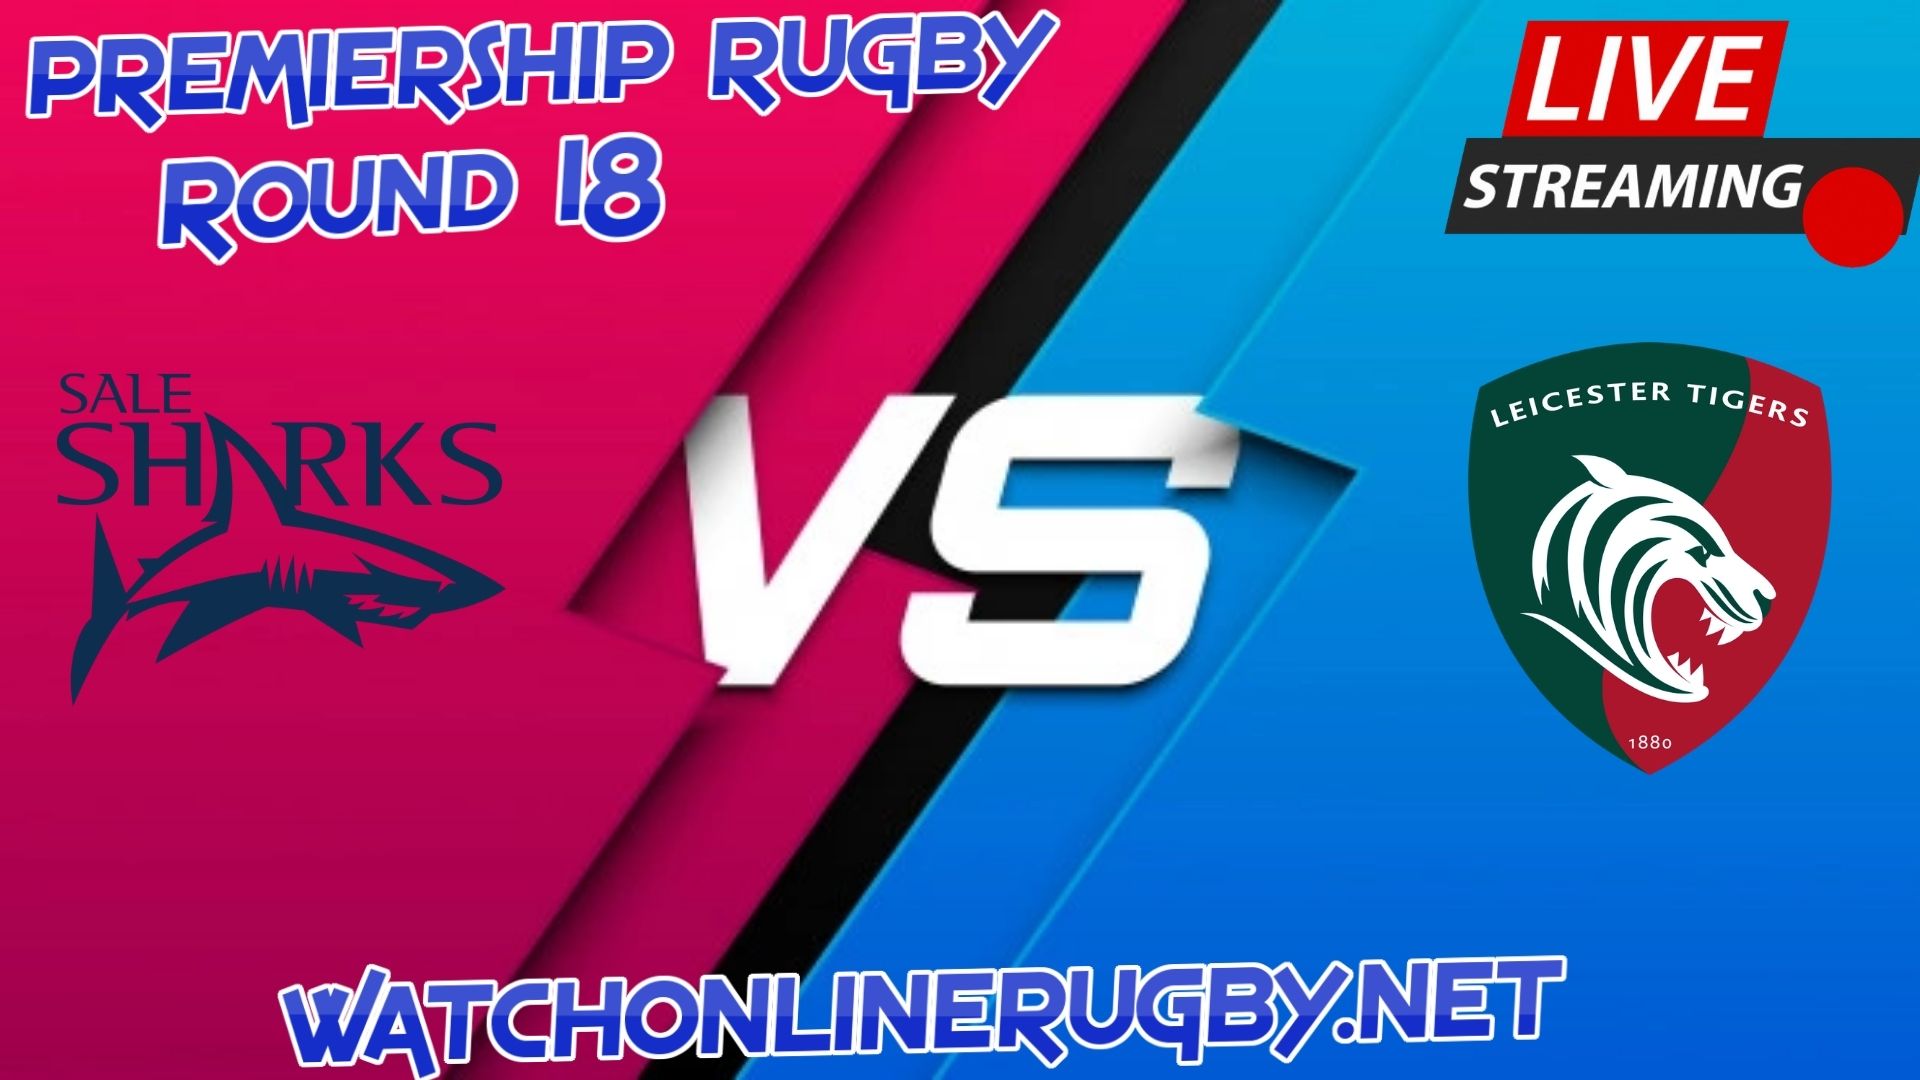 sale-sharks-vs-leicester-tigers-live-stream